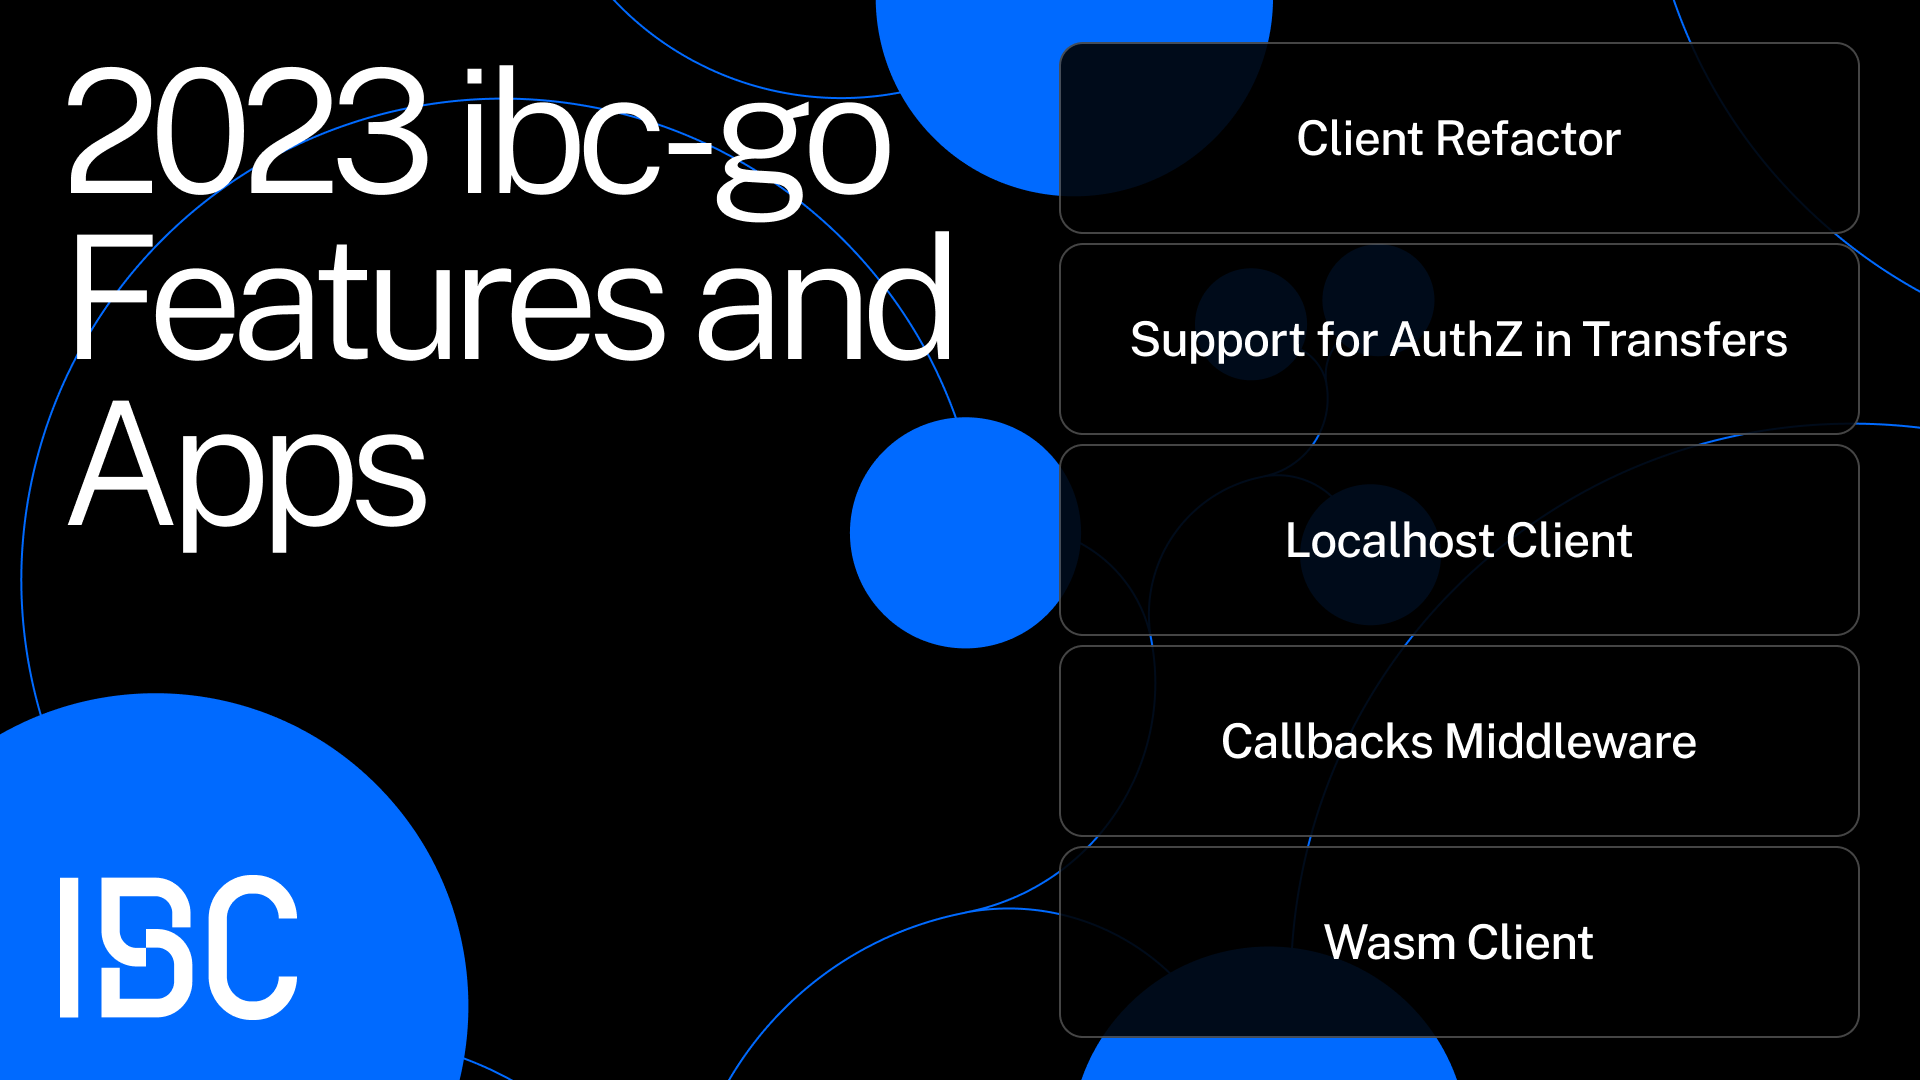 2023 ibc-go features and apps.